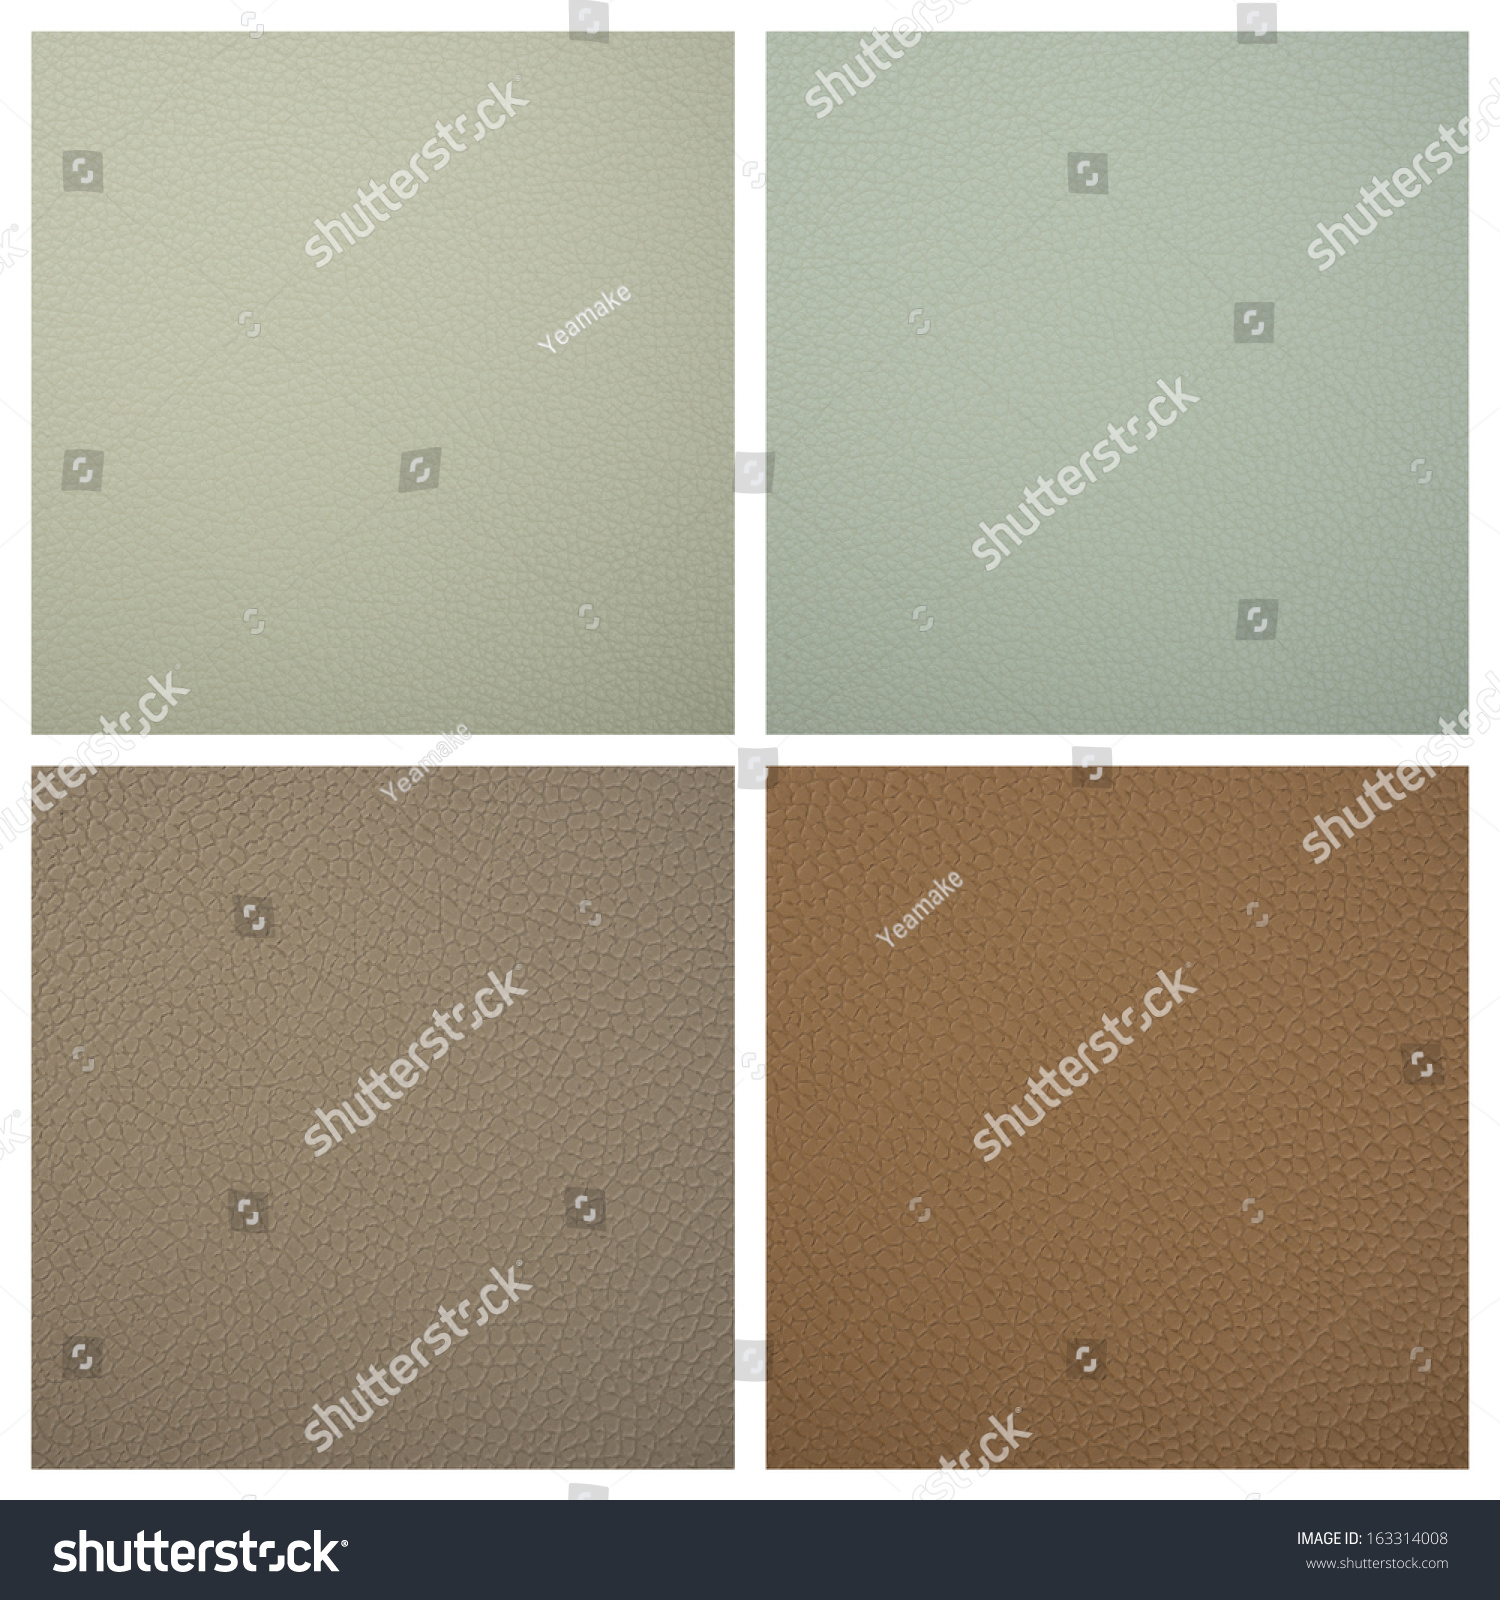 Set from 4 backgrounds of leather texture #163314008